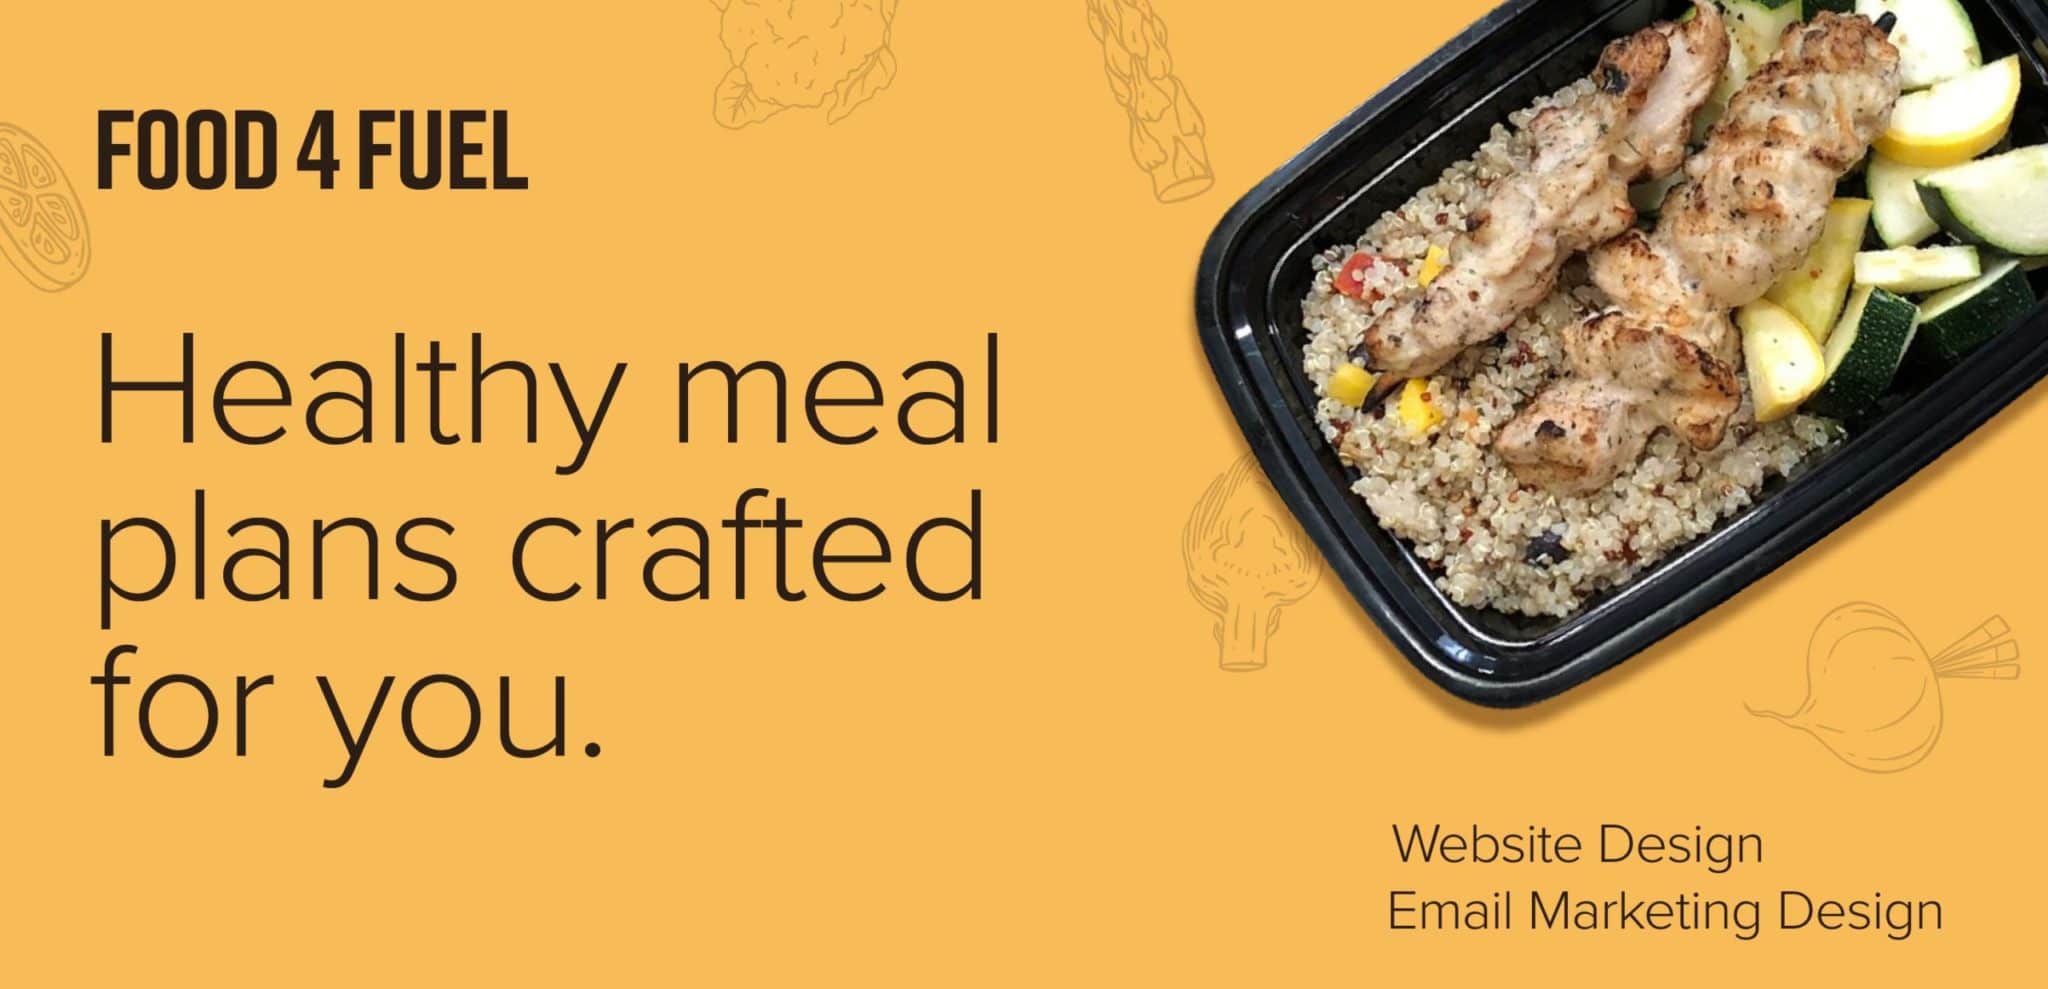 food4fuel - healthy meal plans crafted for you